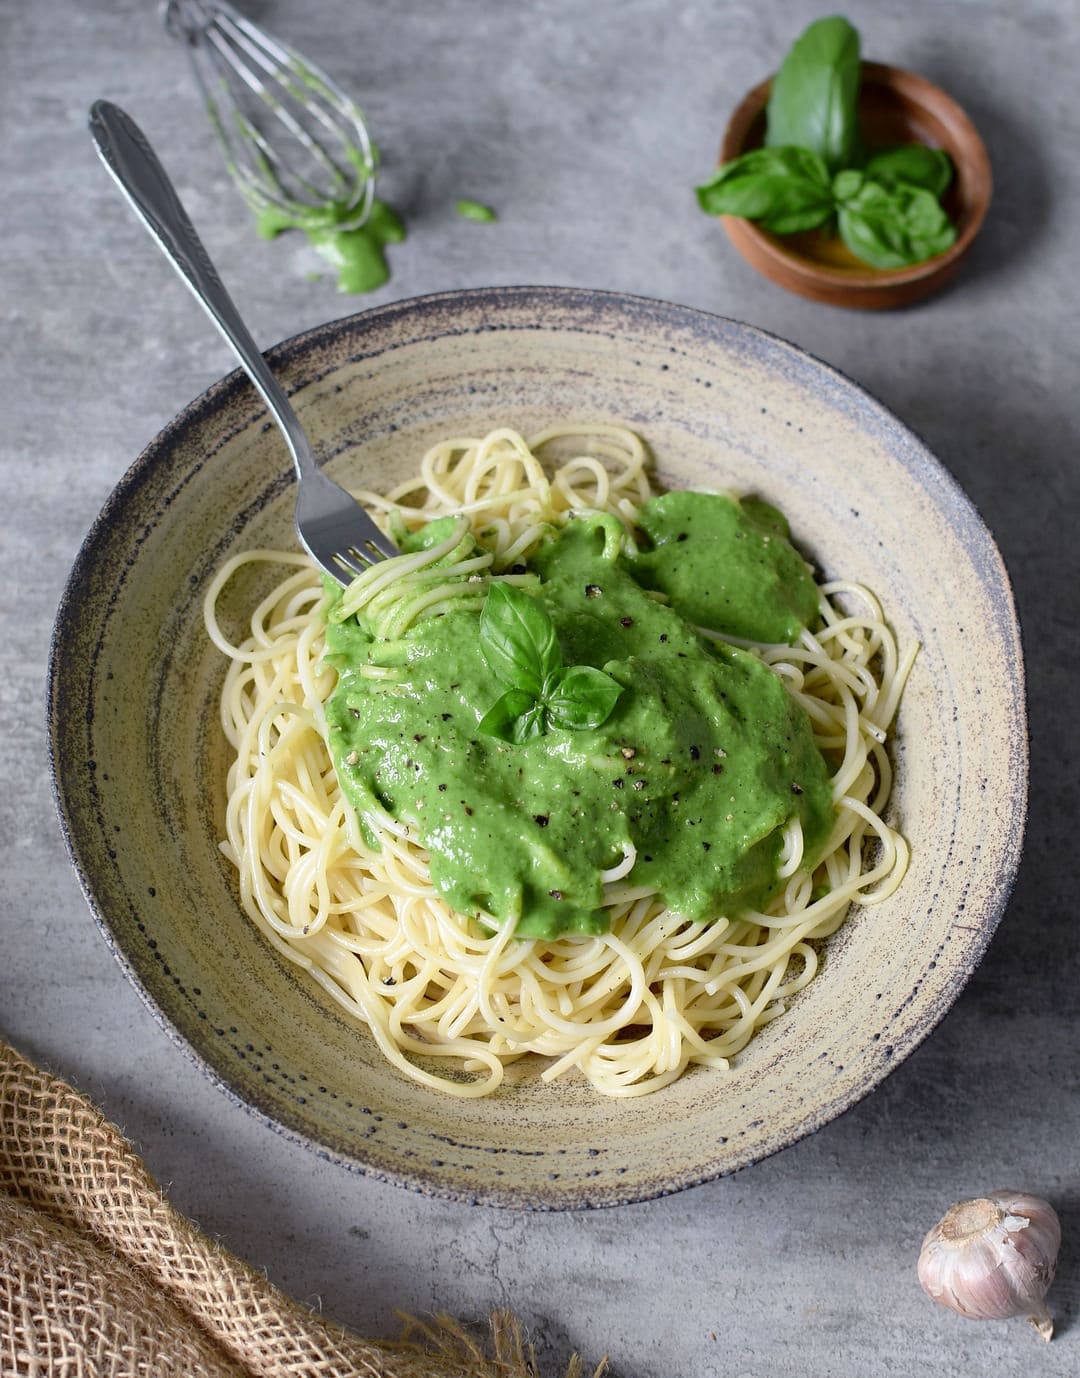 vegan spinach pasta sauce recipe - a creamy spinach basil sauce for spaghetti which is plantbased and gluten free 